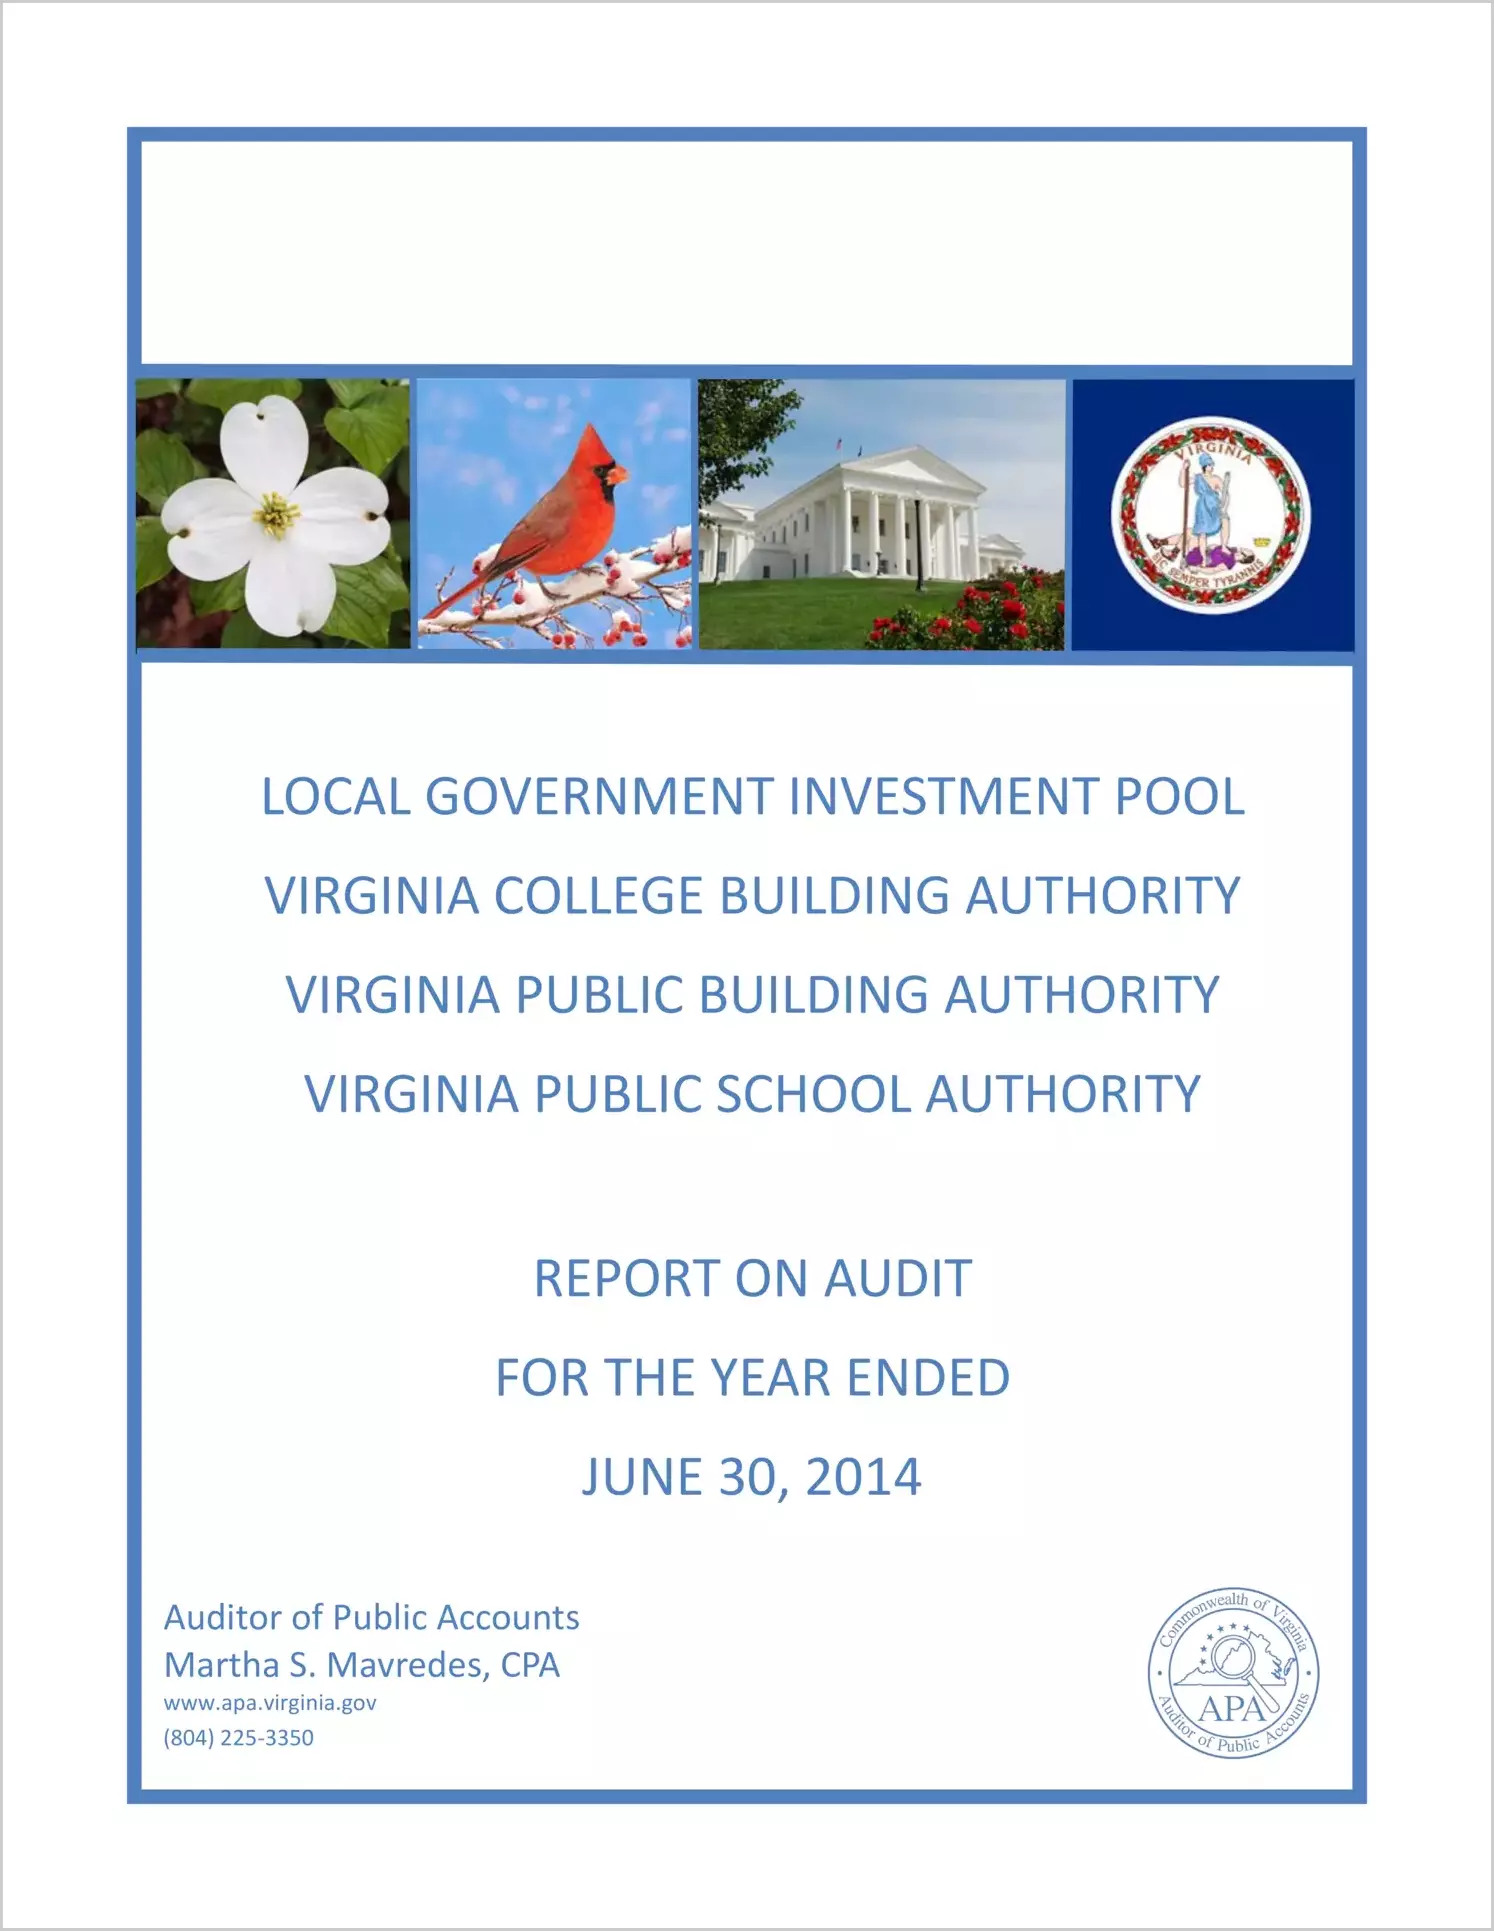 Local Government Investment Pool, Virginia College Building Authority, Virginia Public Building Authority, Virginia Public School Authority Report on Audit for the Year Ended June 30, 2014